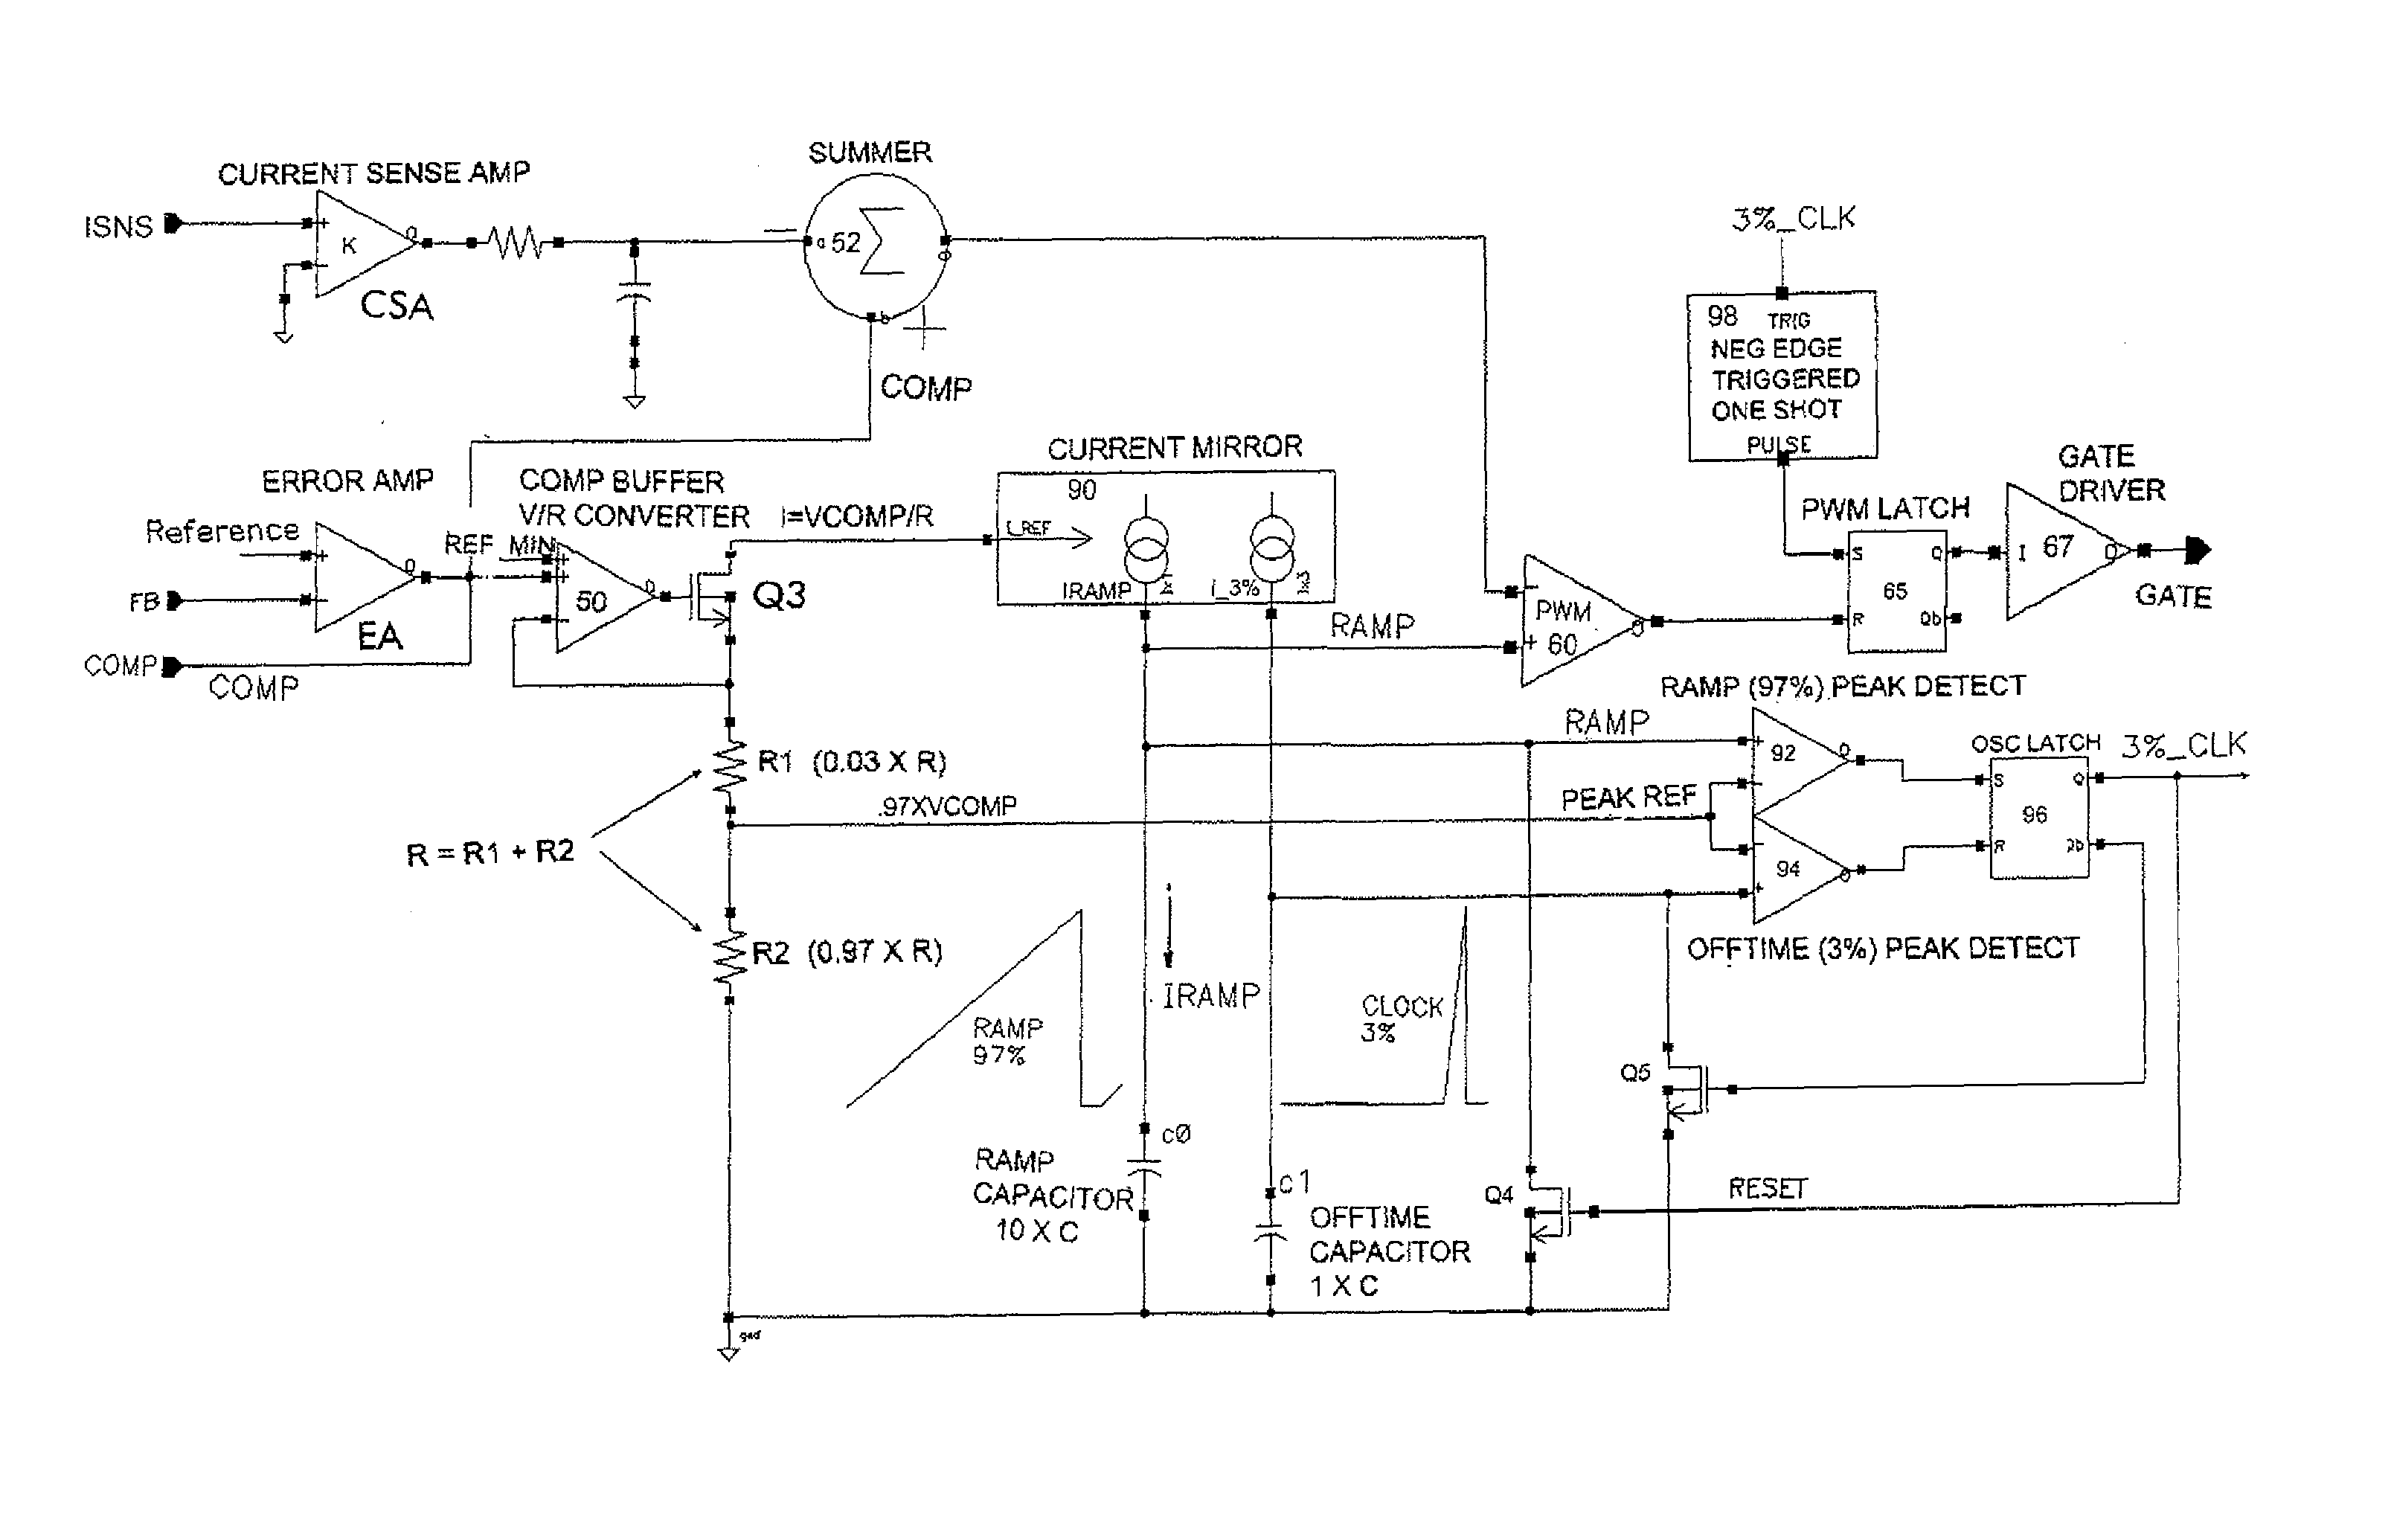 Merged ramp/oscillator for precise ramp control in one cycle PFC converter